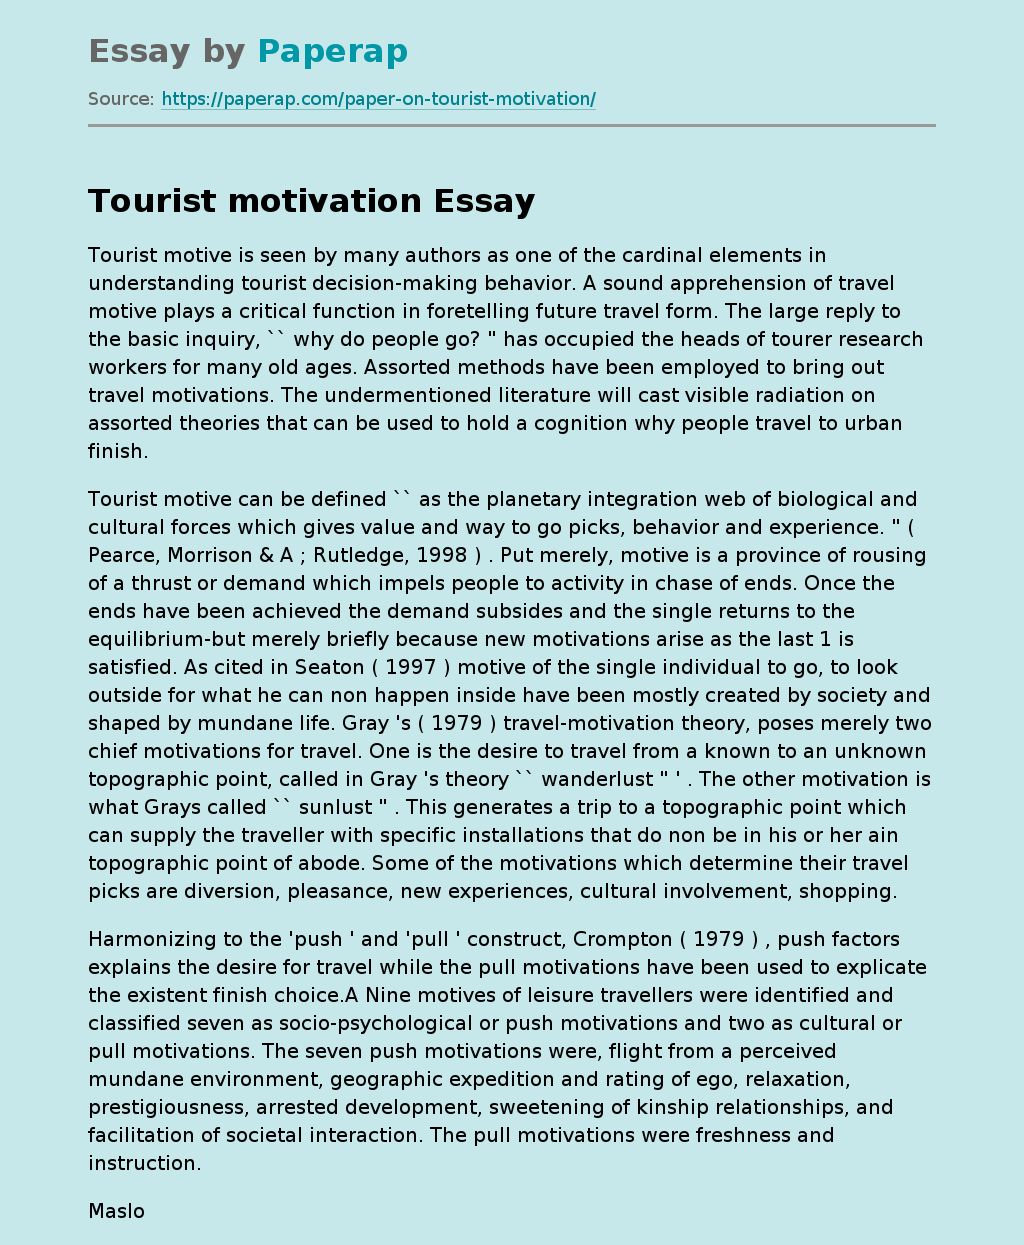 Understanding The Motivation Of People Going On A Trip